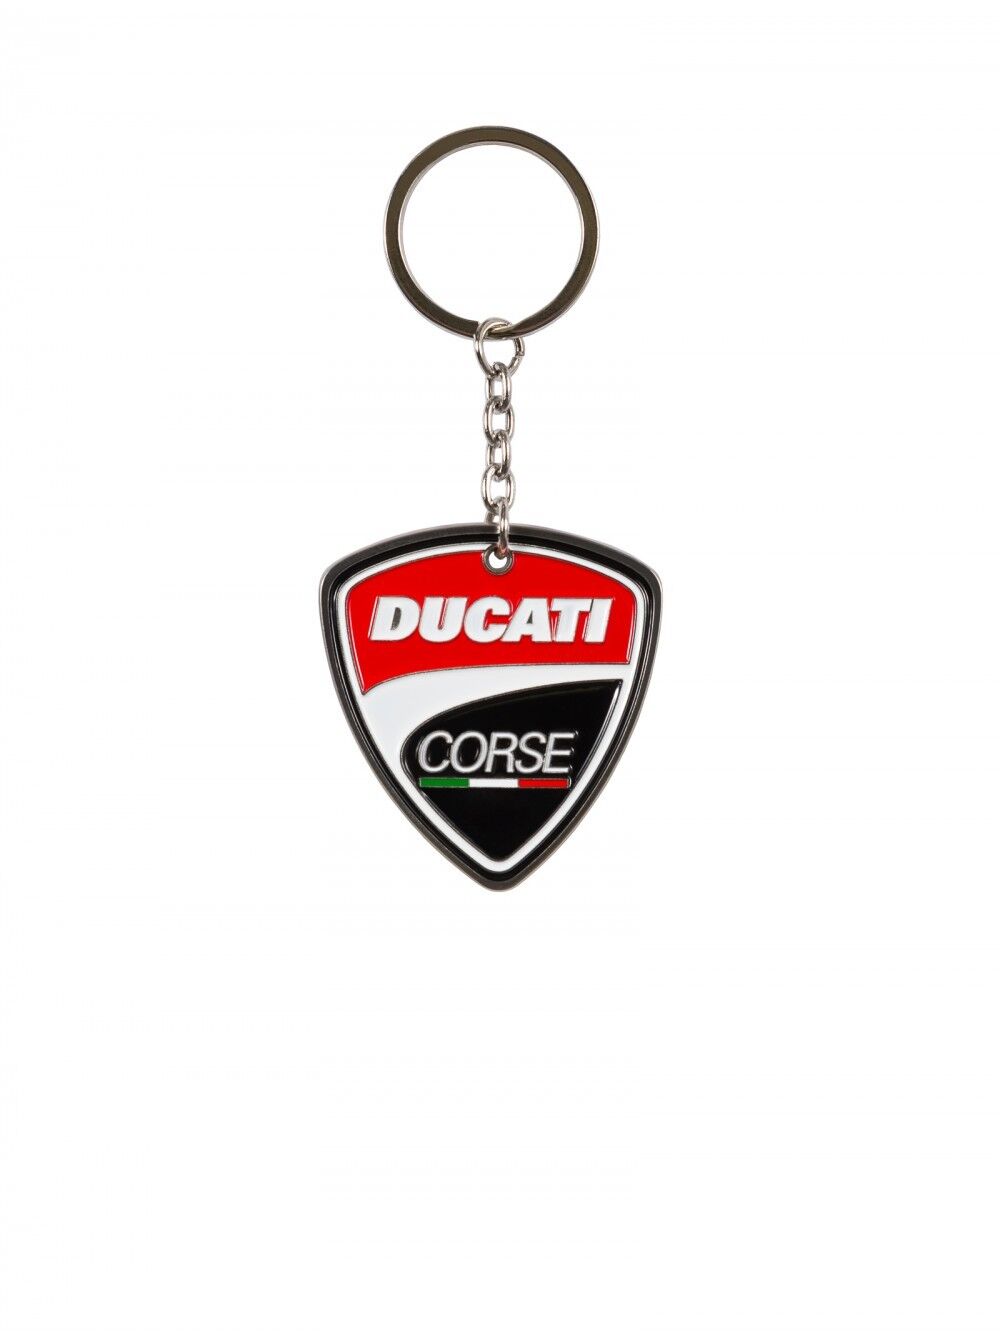 Official Ducati Corse Keyring - 23 56003